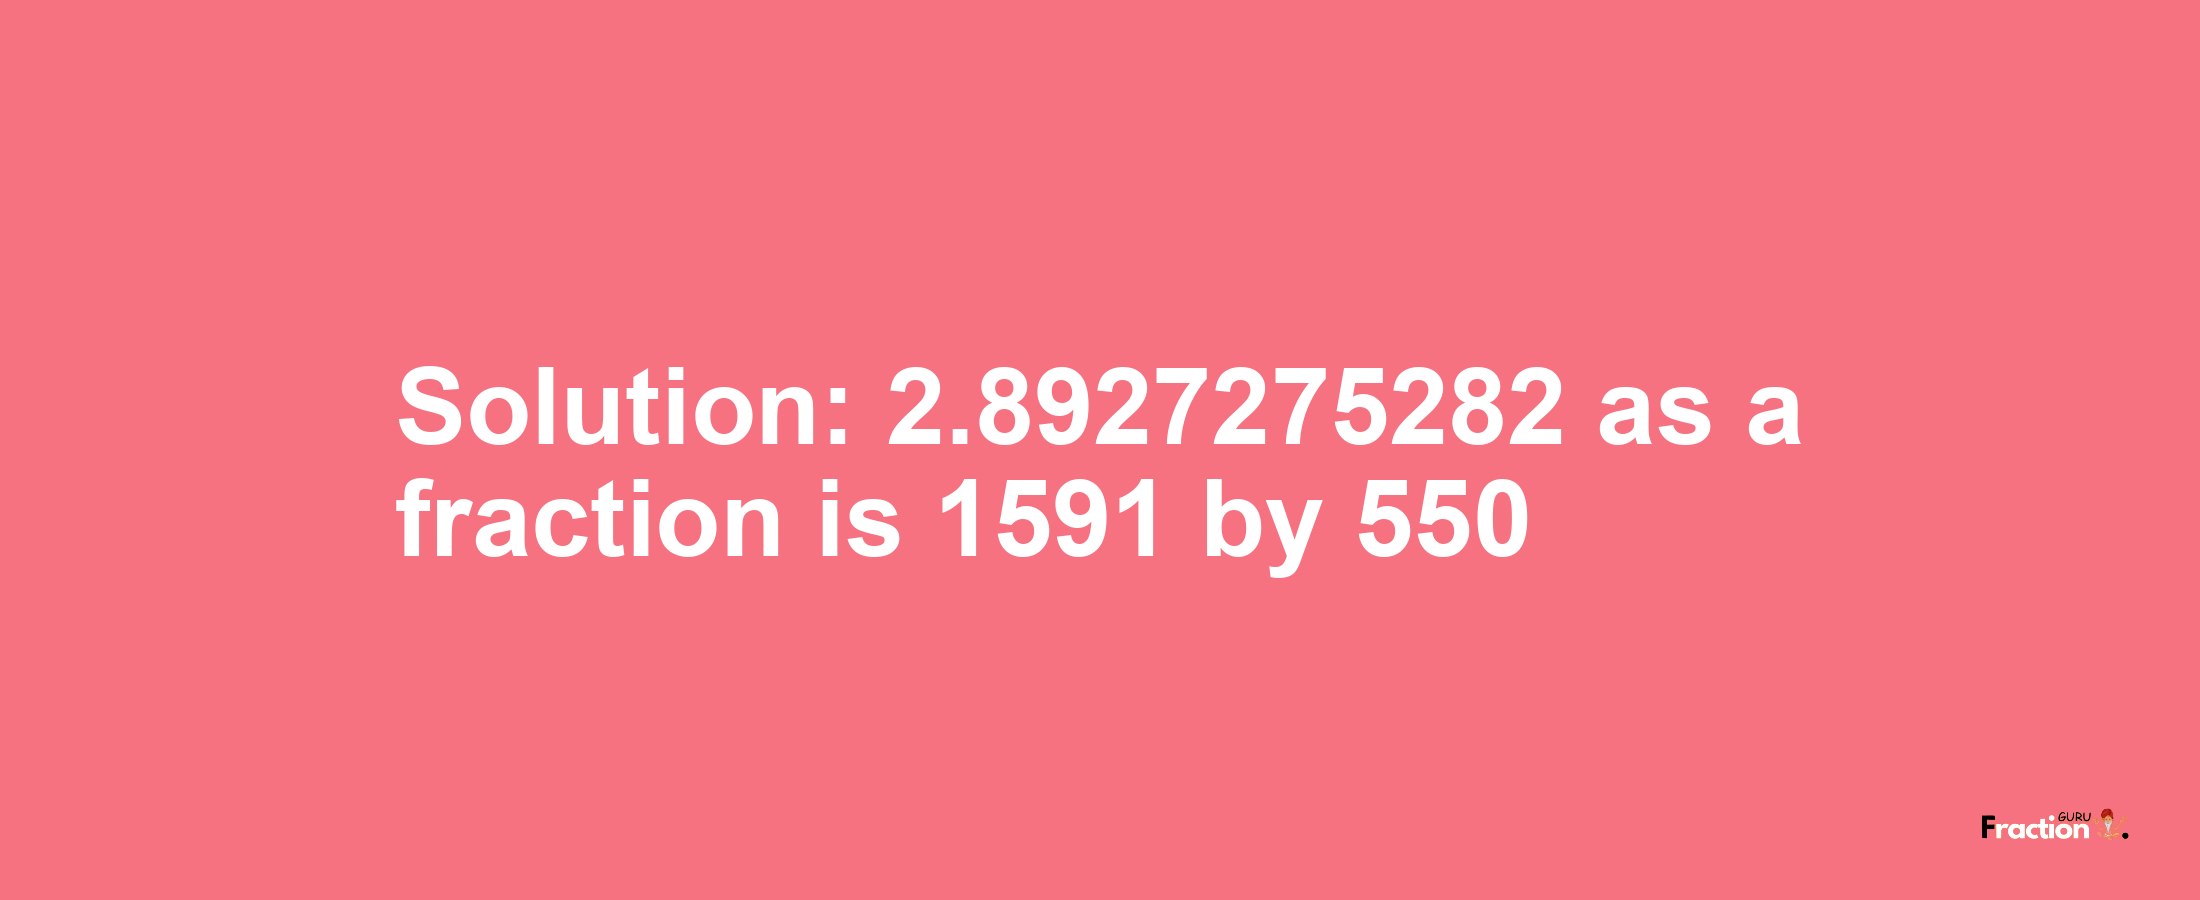 Solution:2.8927275282 as a fraction is 1591/550